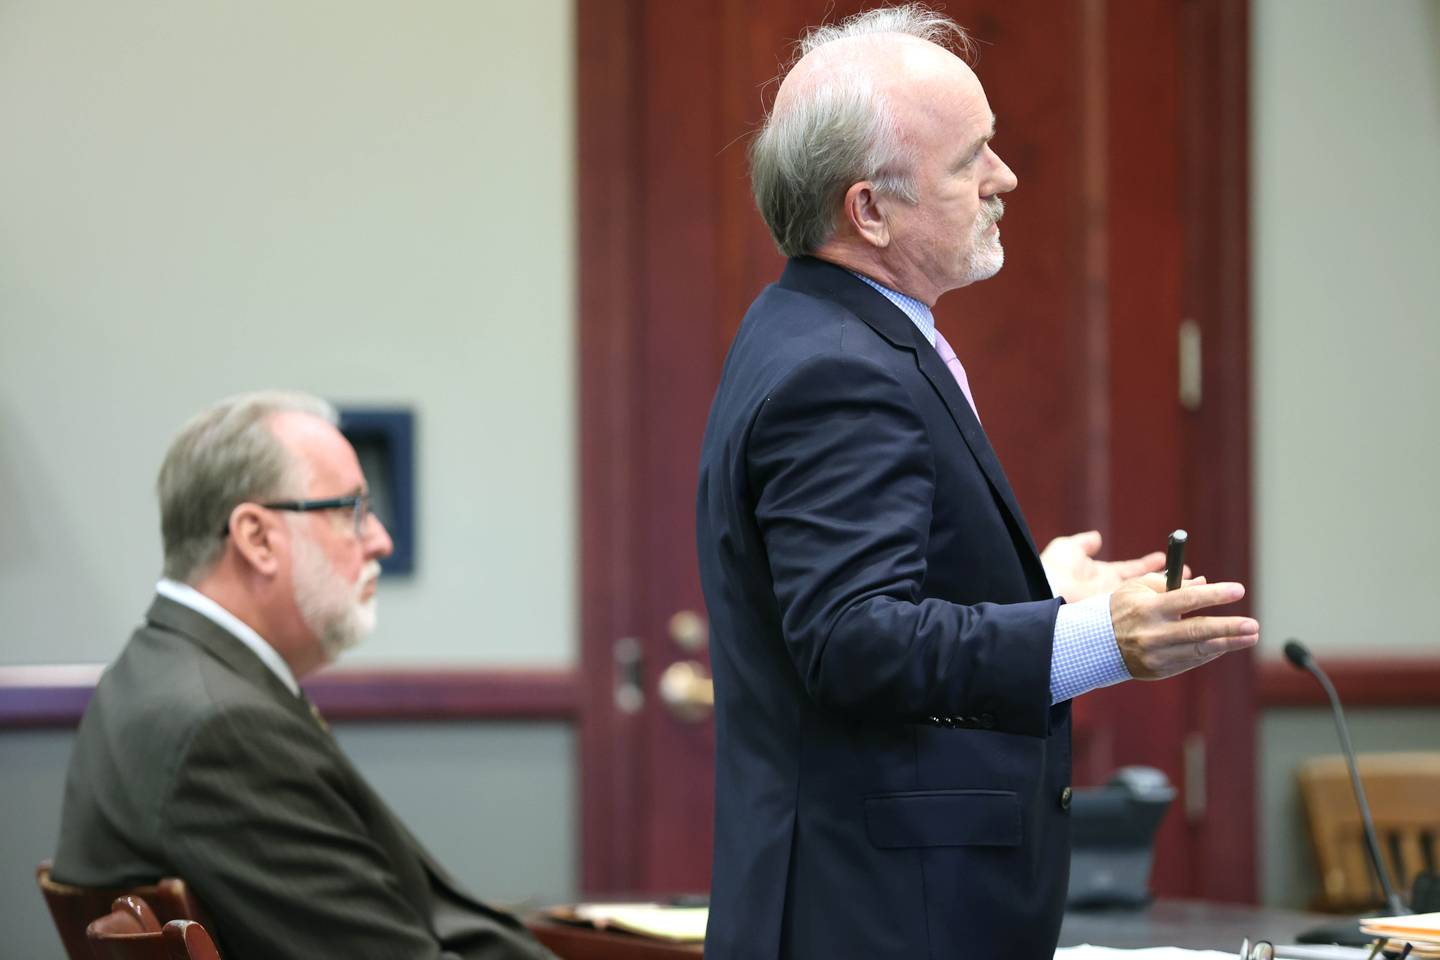 Defense Attorney Clay Campbell, (right) with his client, former DeKalb School District 428 Superintendent Douglas Moeller, makes his opening statement Wednesday, Oct. 5, 2022 at the DeKalb County Courthouse in Sycamore. Moeller was charged in April 2018 with non-consensual dissemination of private sexual images, a class 4 felony.